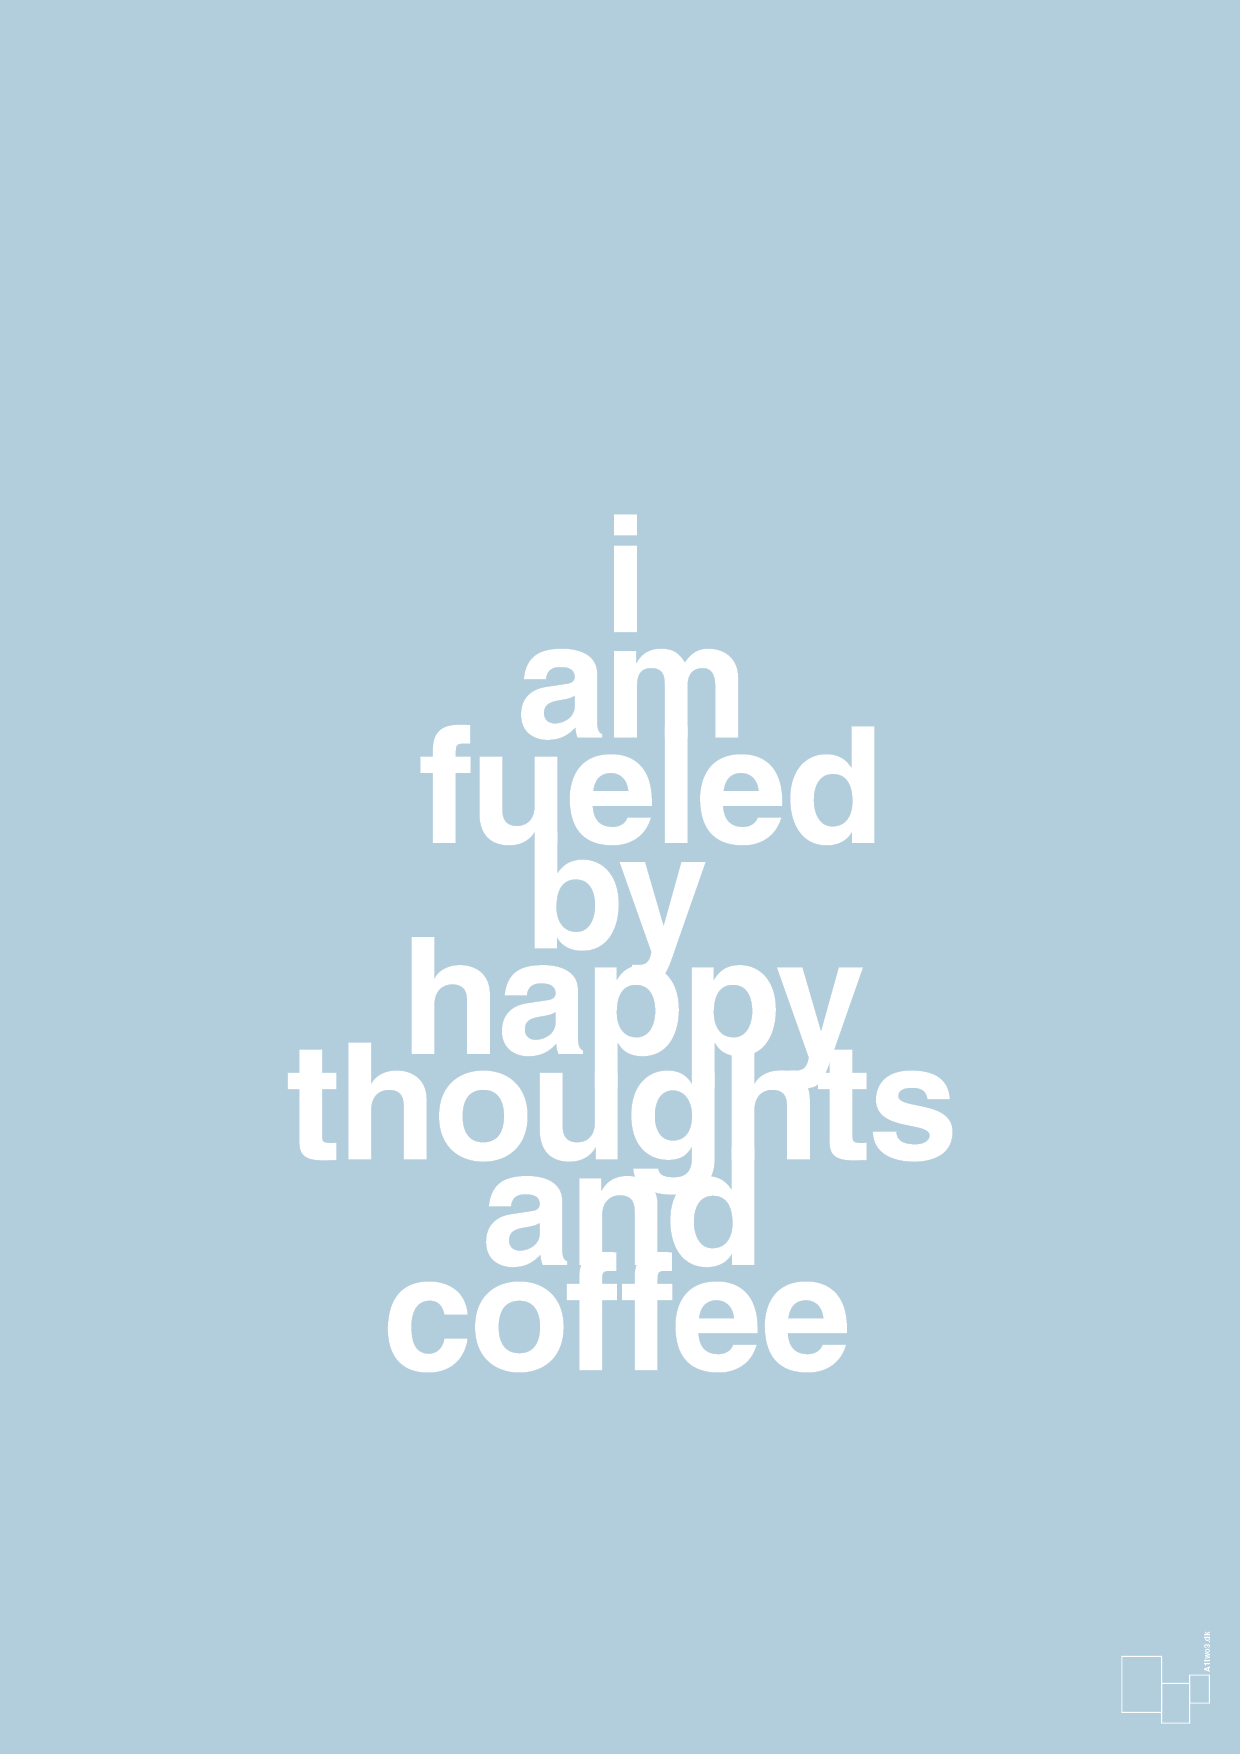 i am fueled by happy thoughts and coffee - Plakat med Mad & Drikke i Heavenly Blue